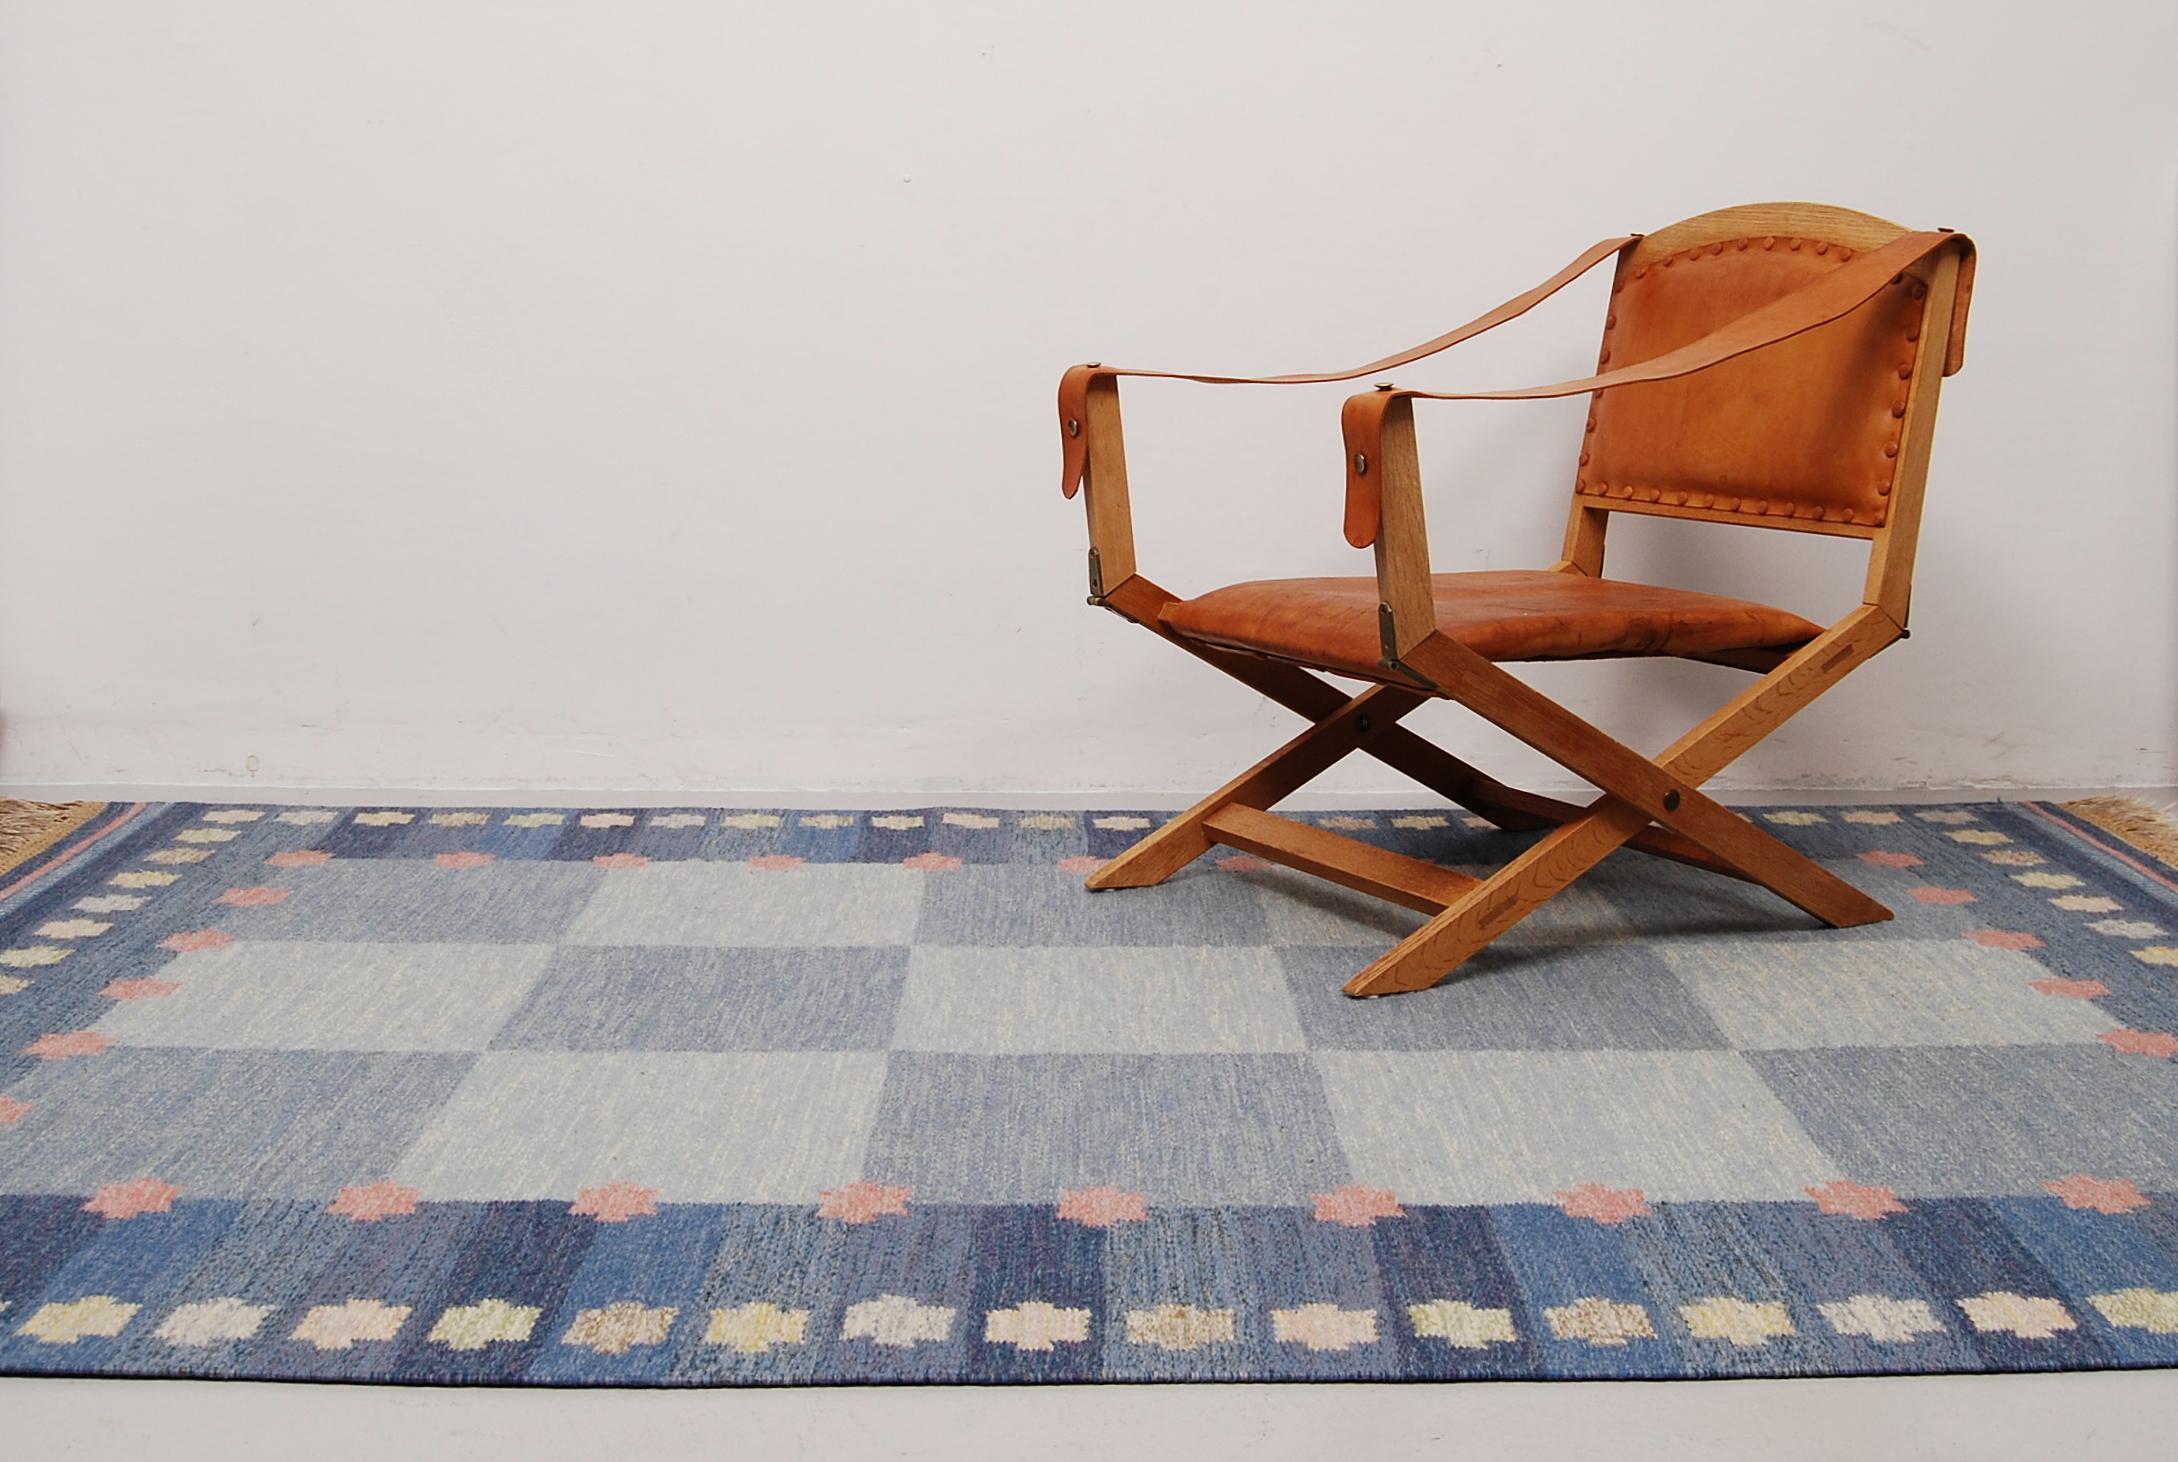 This flat weave / rölakan / kelim carpet was designed by Anna Johanna Ångström and made by hand in Sweden. This example with fields in different shades of blue, and some elements of pink, beige and light brown was woven in wool and are signed ”Å” to